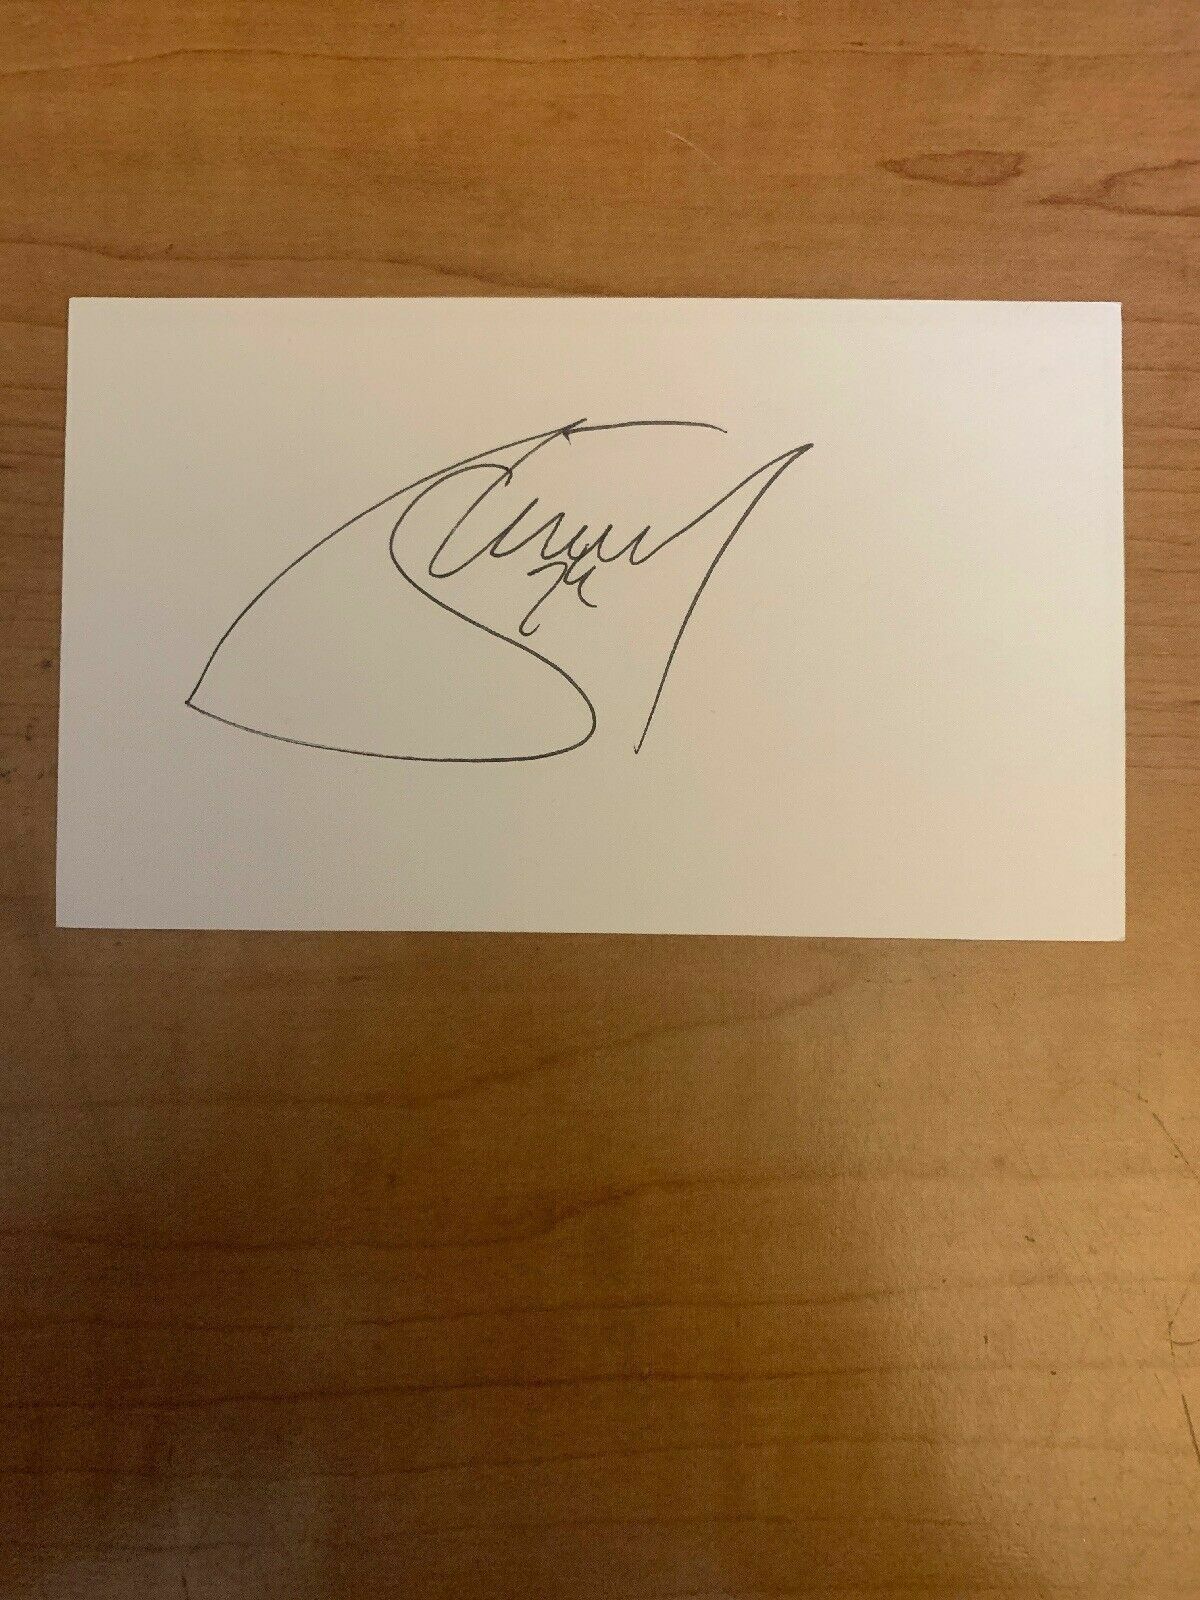 ANDREAS HINKEL - SOCCER - AUTOGRAPH SIGNED - INDEX CARD - AUTHENTIC - B7016